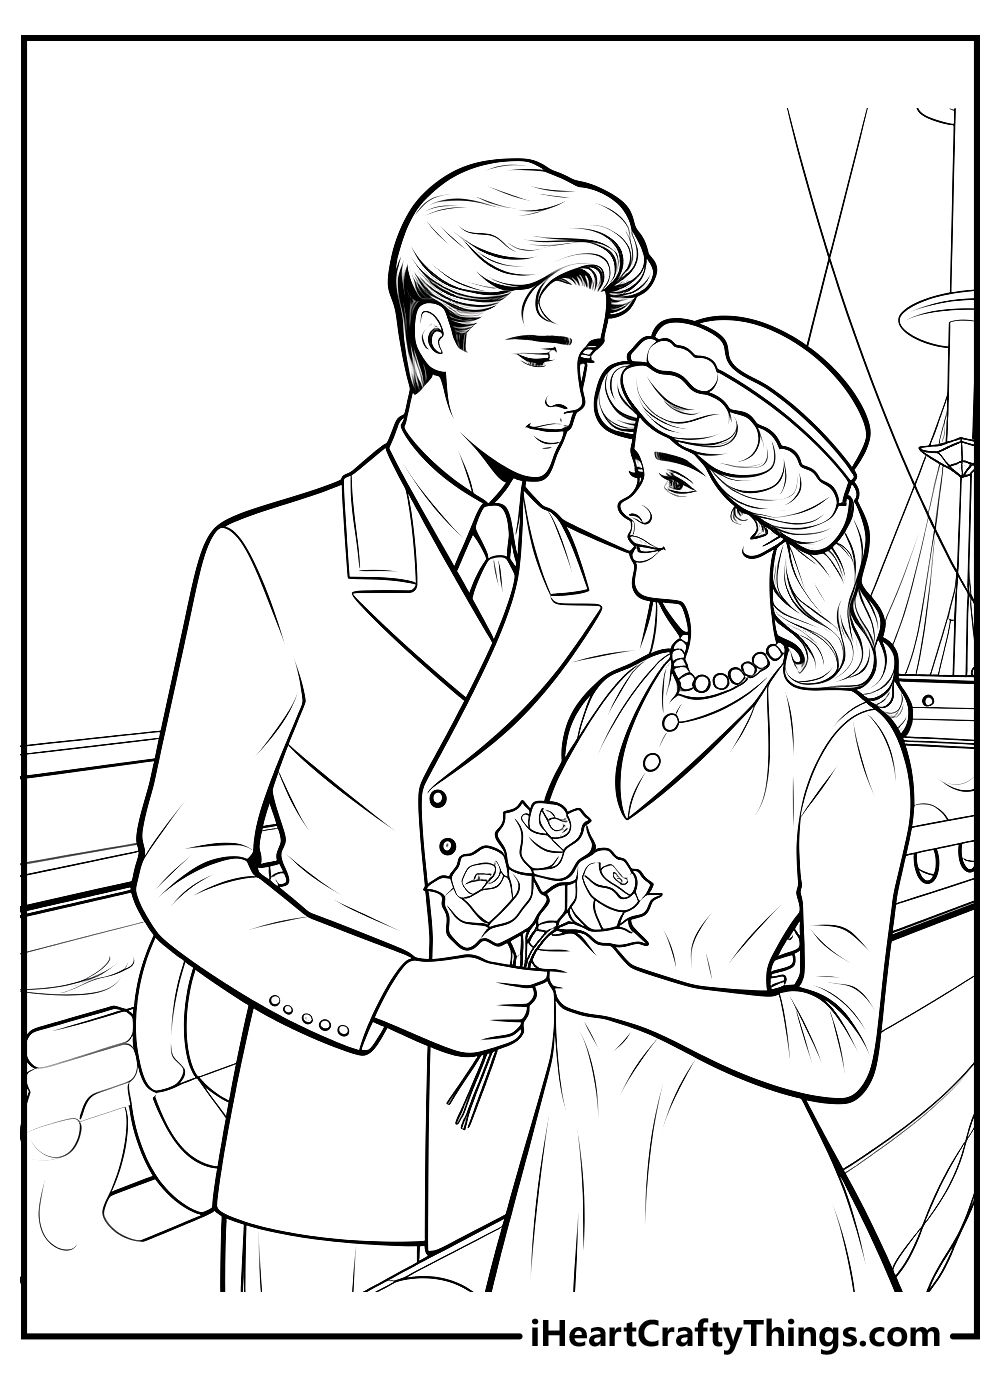 titanic scenes coloring pages